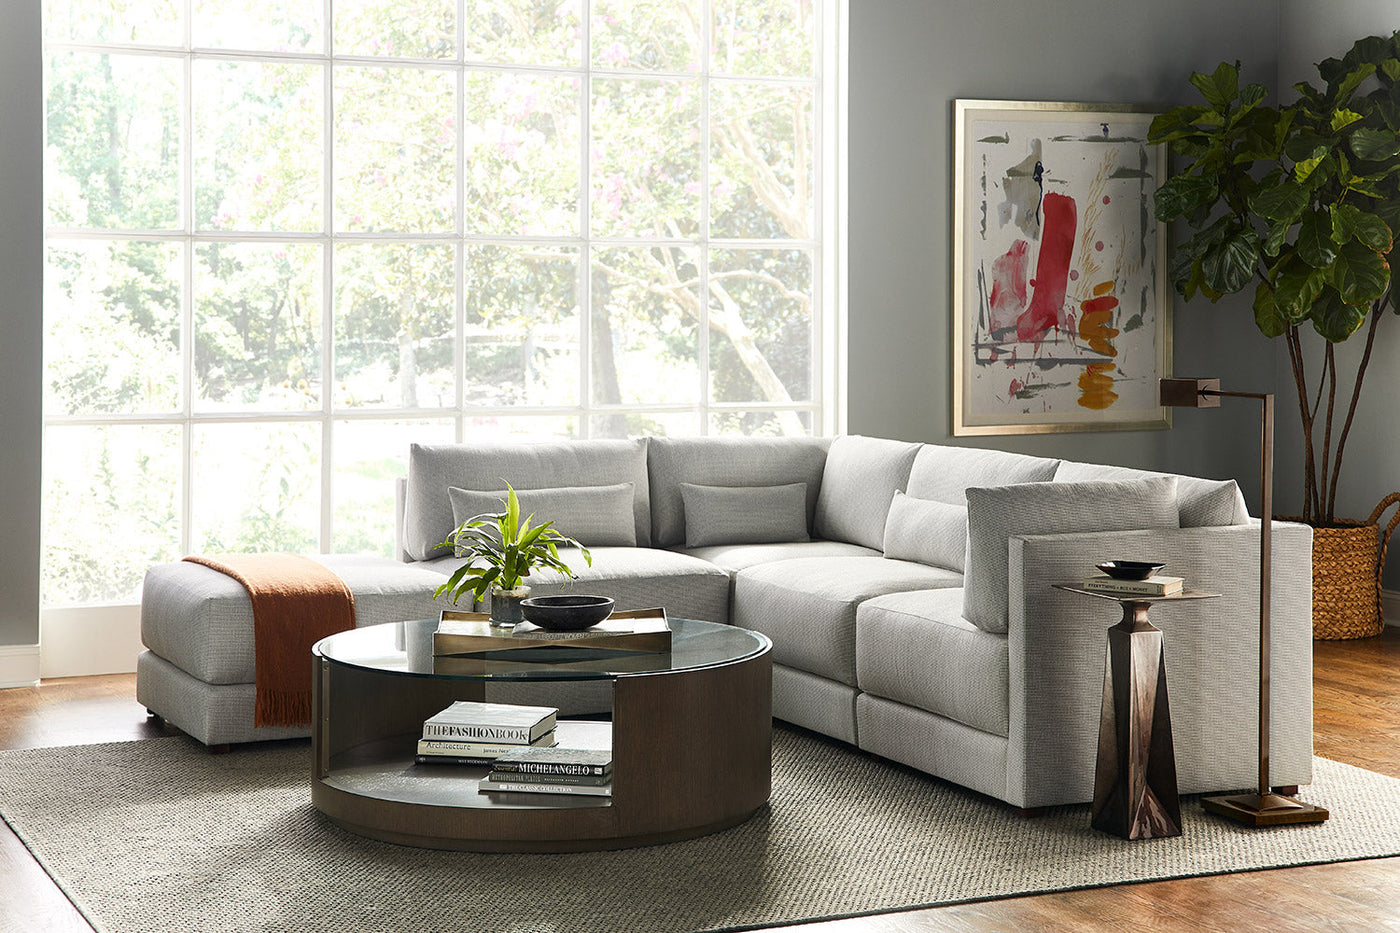 Vanguard brings comfort to your family's living room at home.